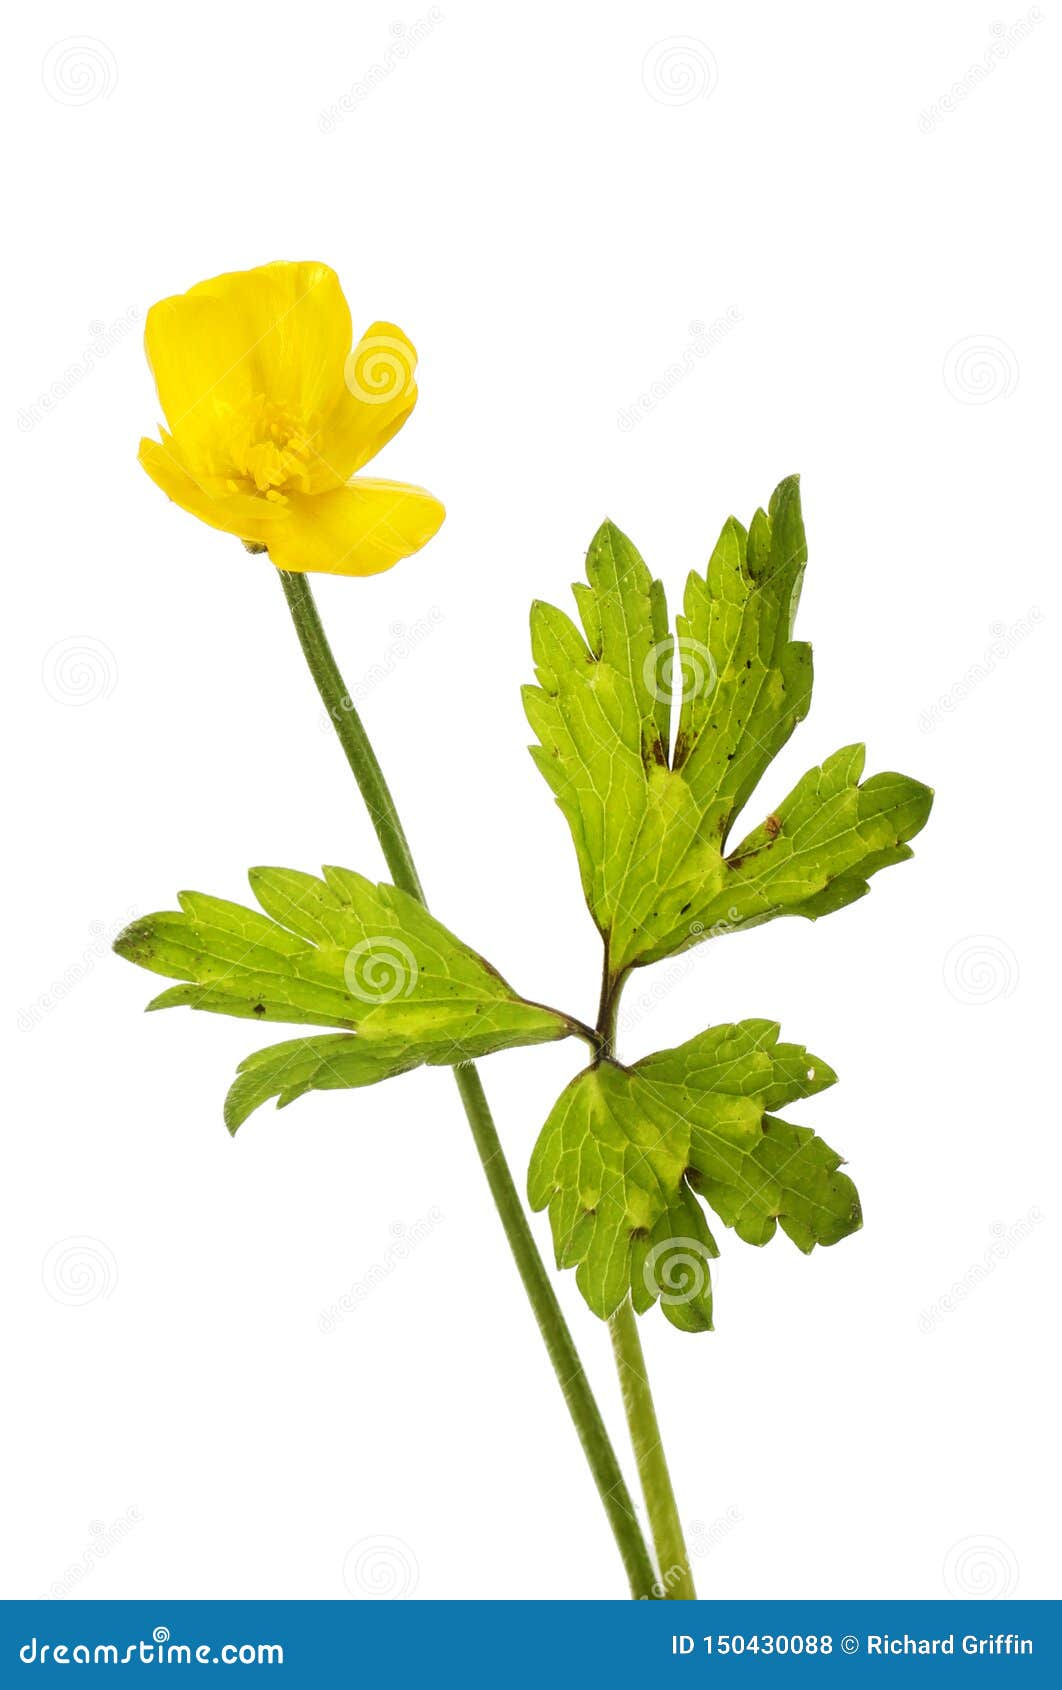 Buttercup Flower and Leaves Stock Photo - Image of creeping, stem ...